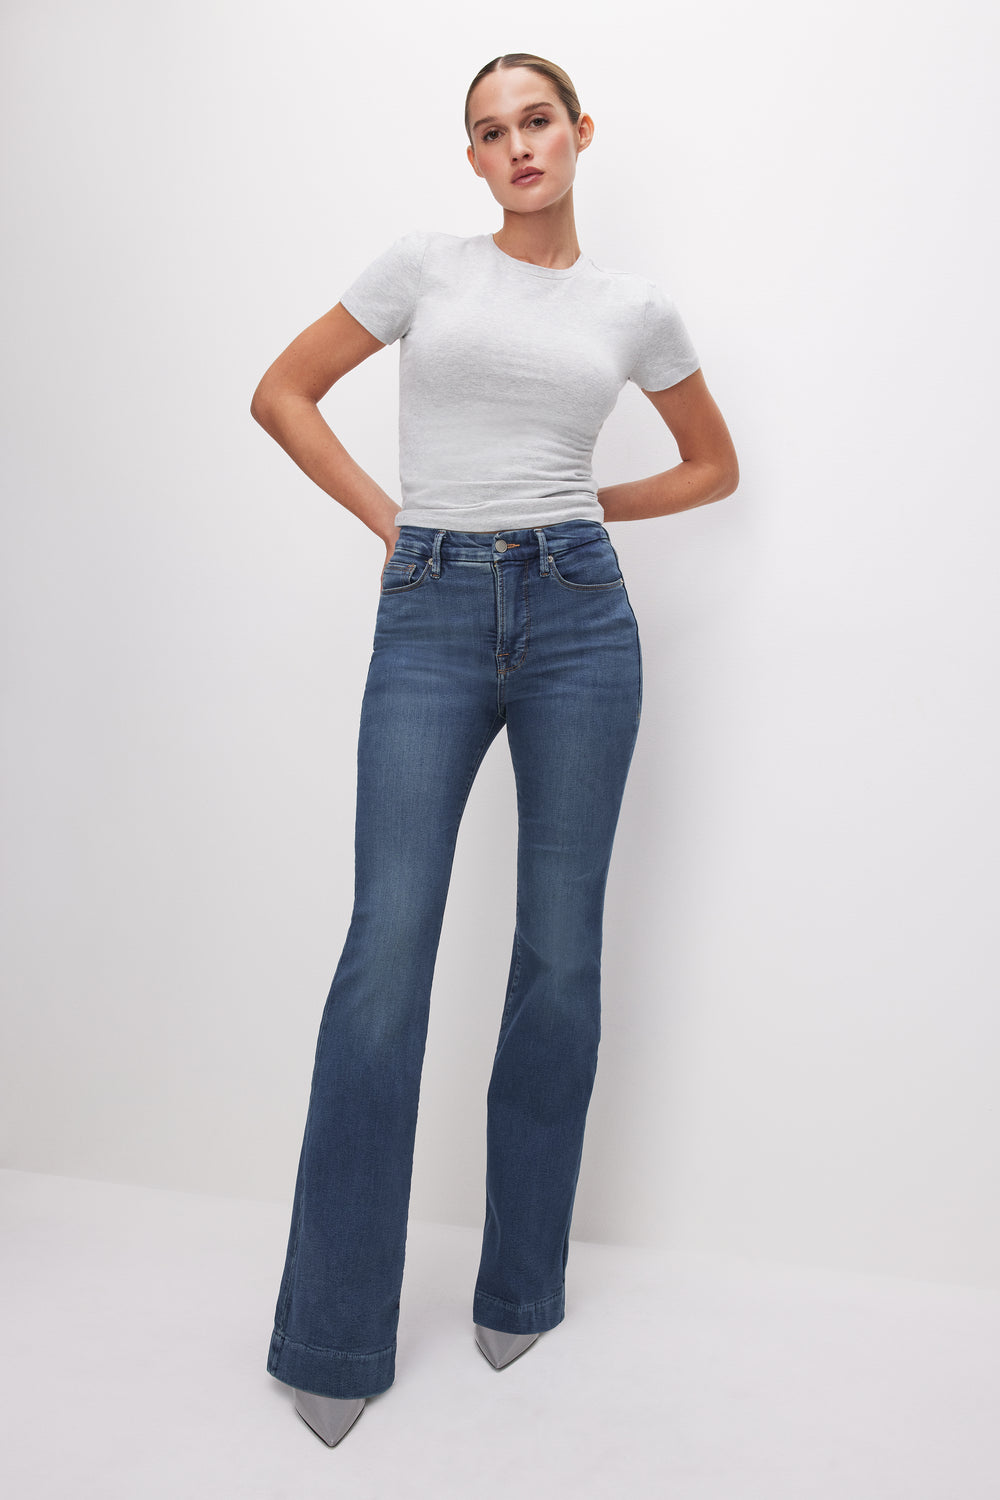 I.N.C. International Concepts Petite Pull-On Flared Jeans, Created